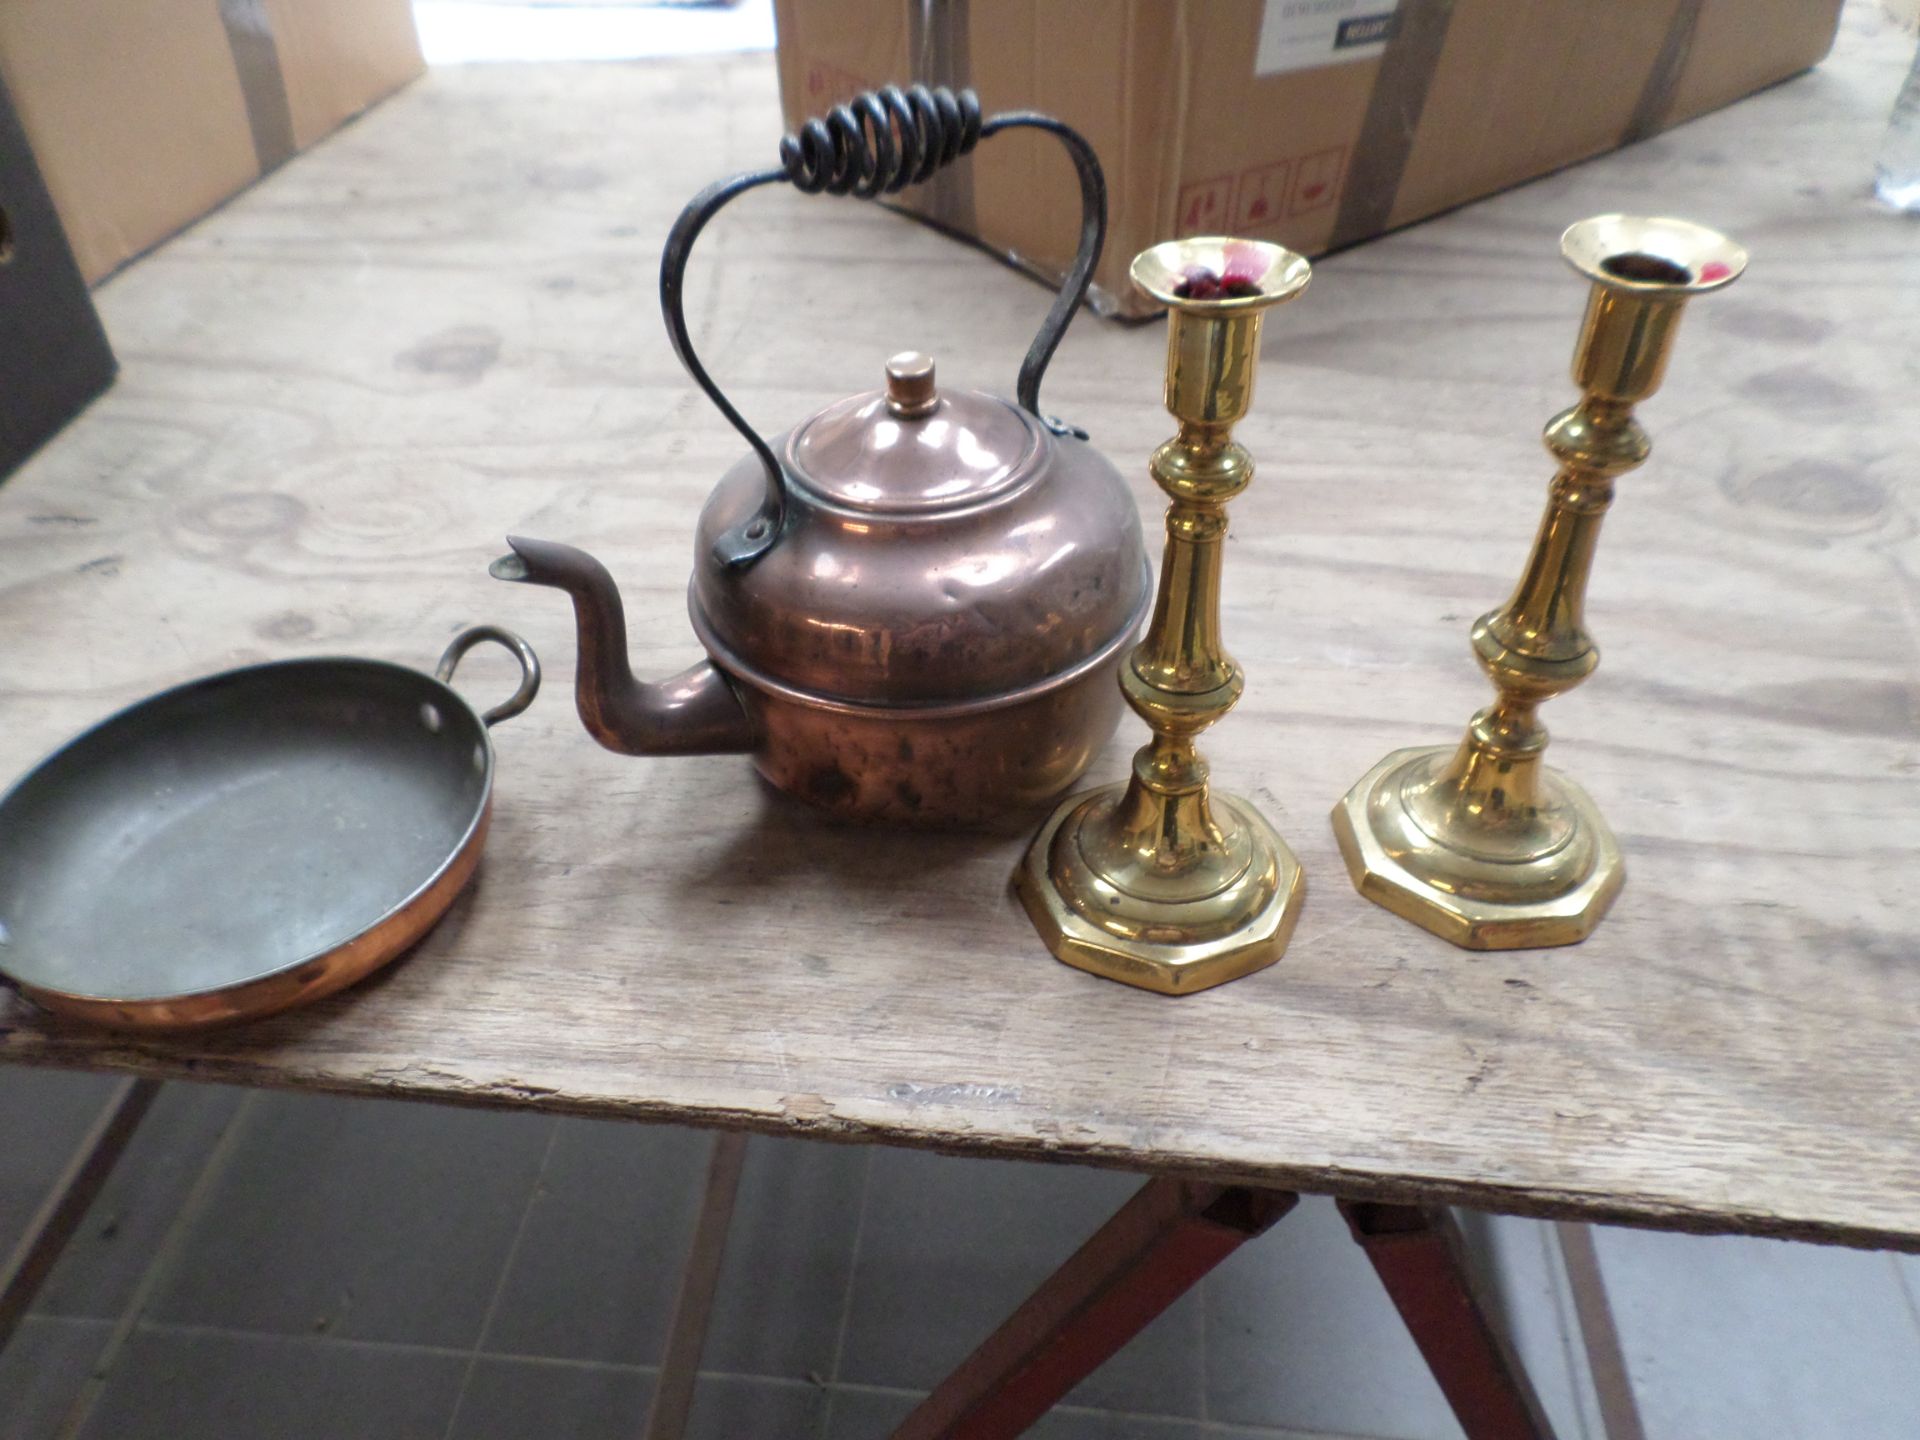 Brass candlesticks, bell, shoes, copper kettle and dish